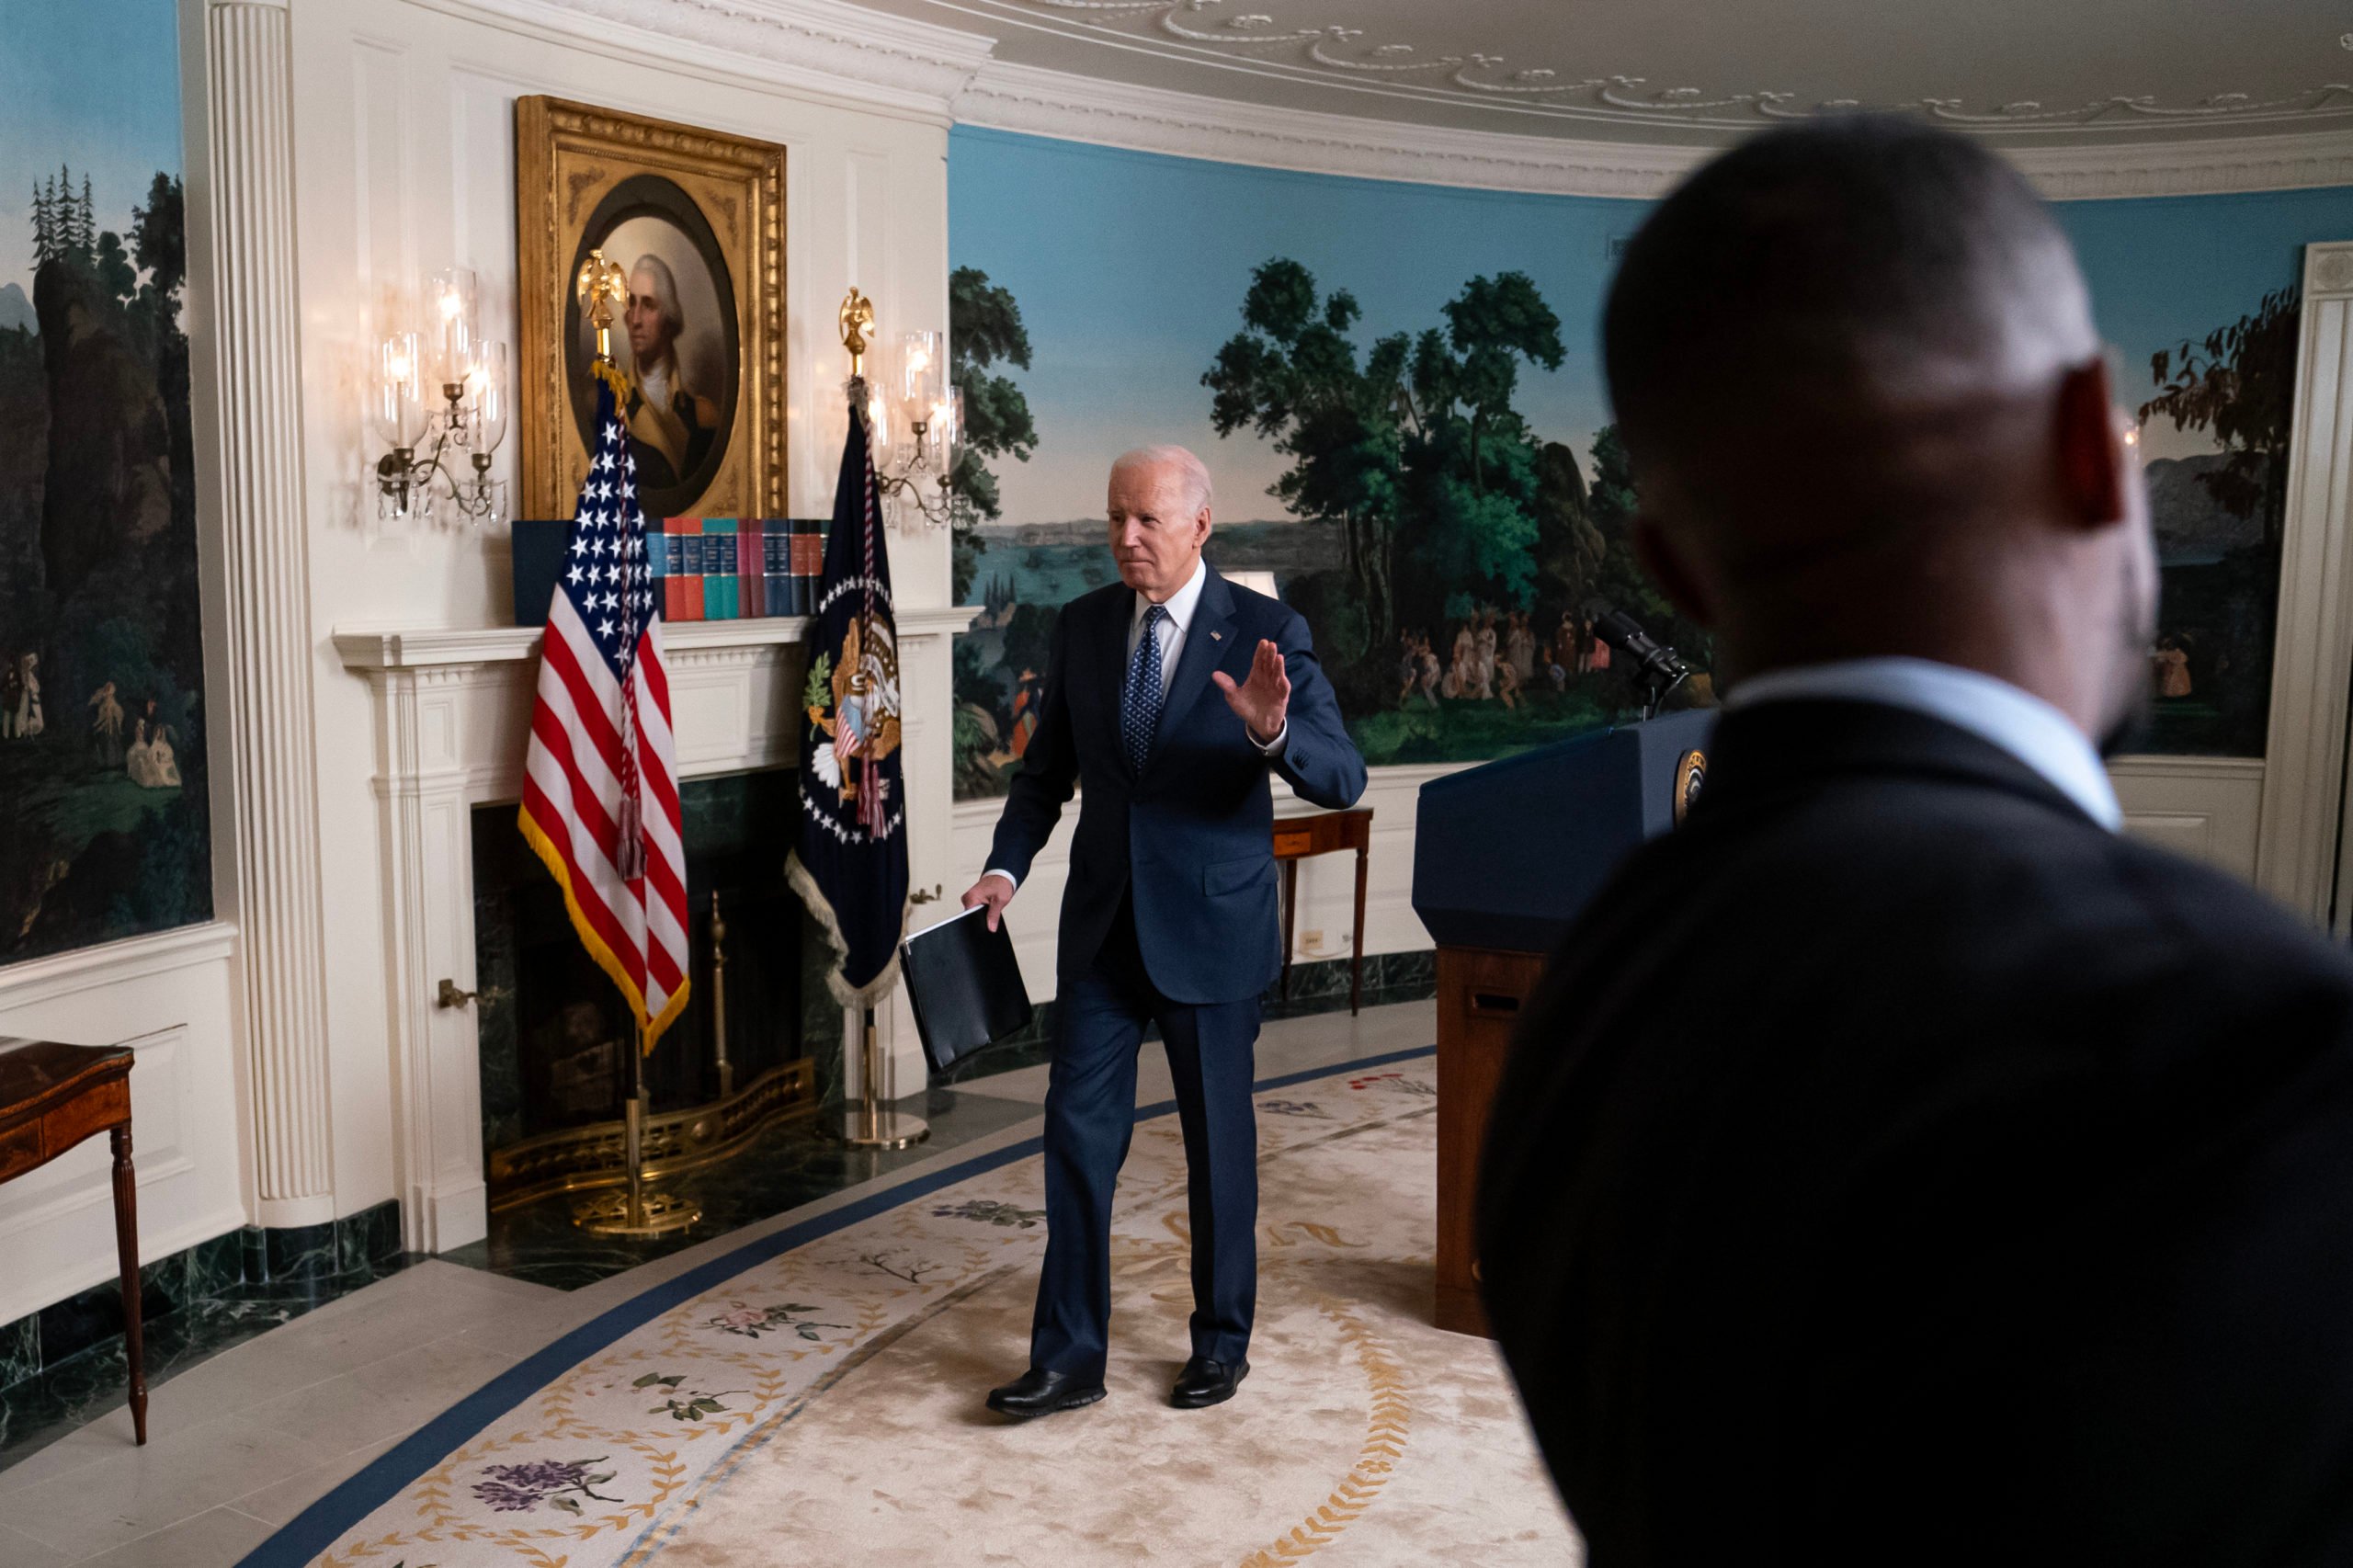 U.S. President Joe Biden departs after delivering remarks in the Diplomatic Reception Room of the White House on February 8, 2024 in Washington, DC. Biden addressed the Special Counsel's report on his handling of classified material, and the status of the war in Gaza. (Photo by Nathan Howard/Getty Images)